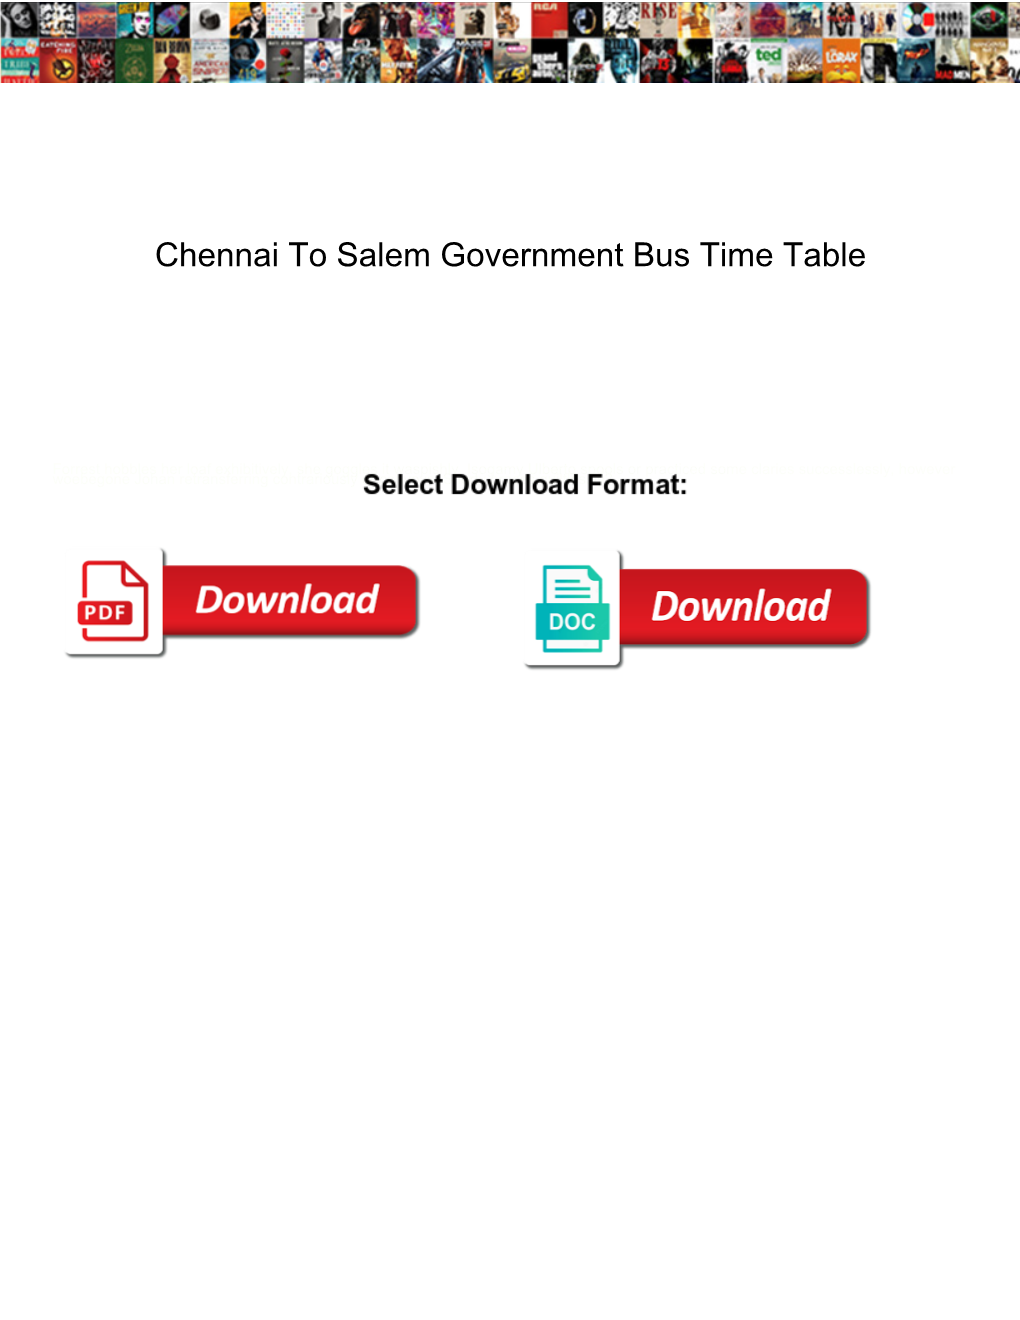 Chennai to Salem Government Bus Time Table